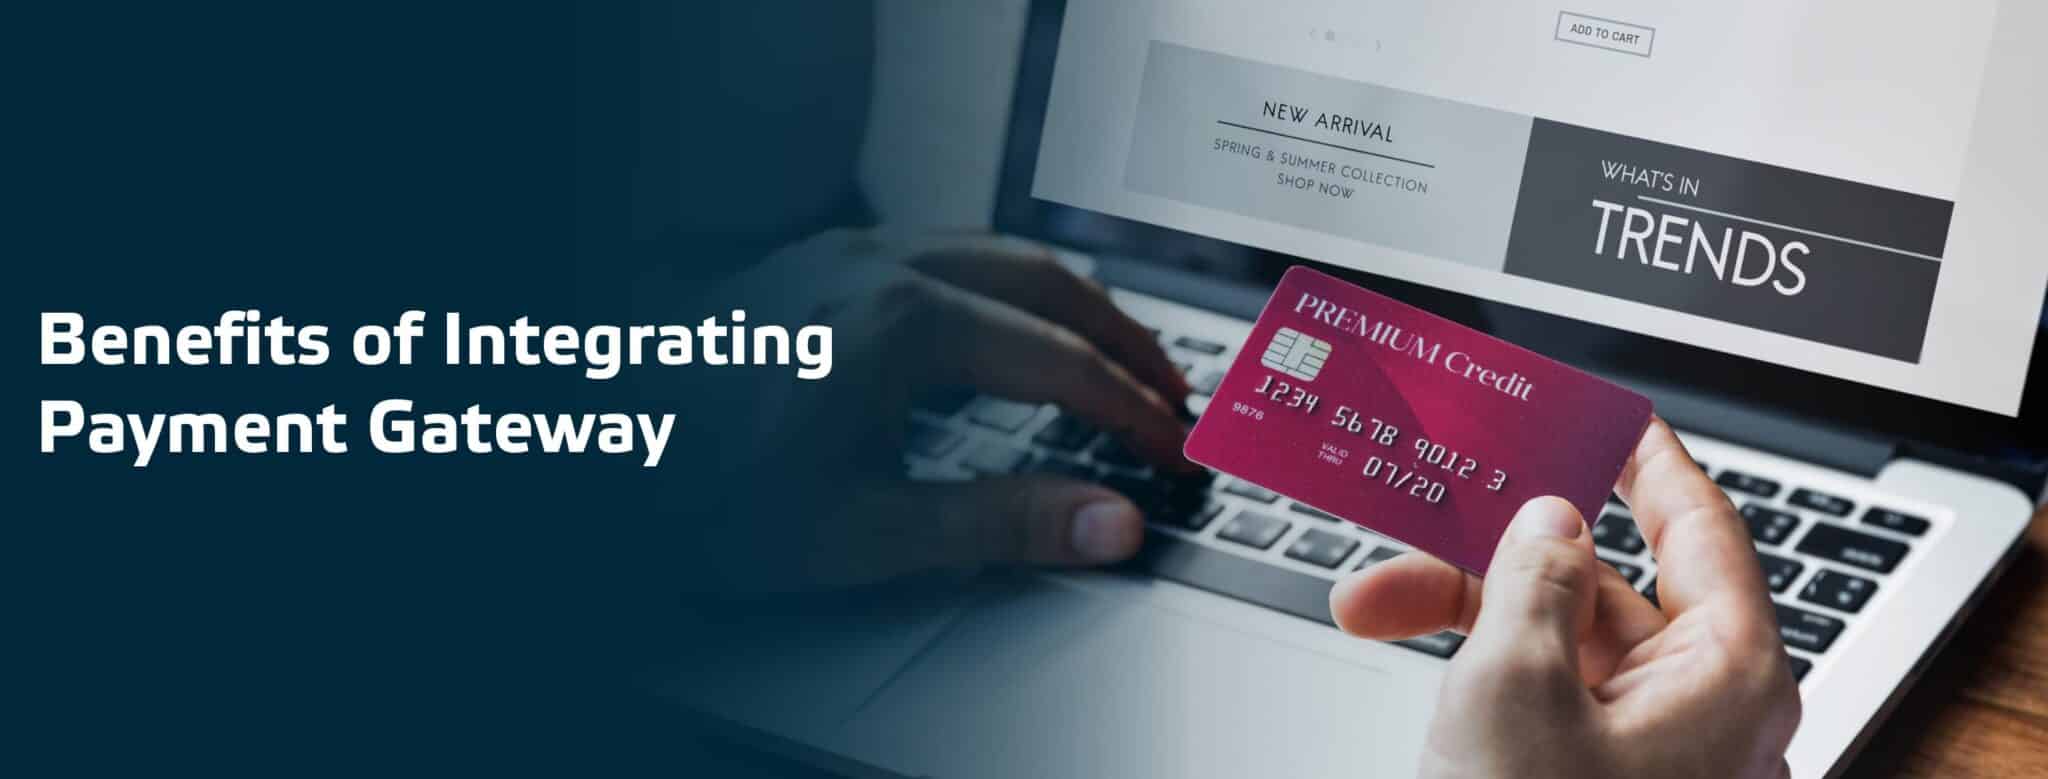 Benefits of Payment Gateway for a Web Application